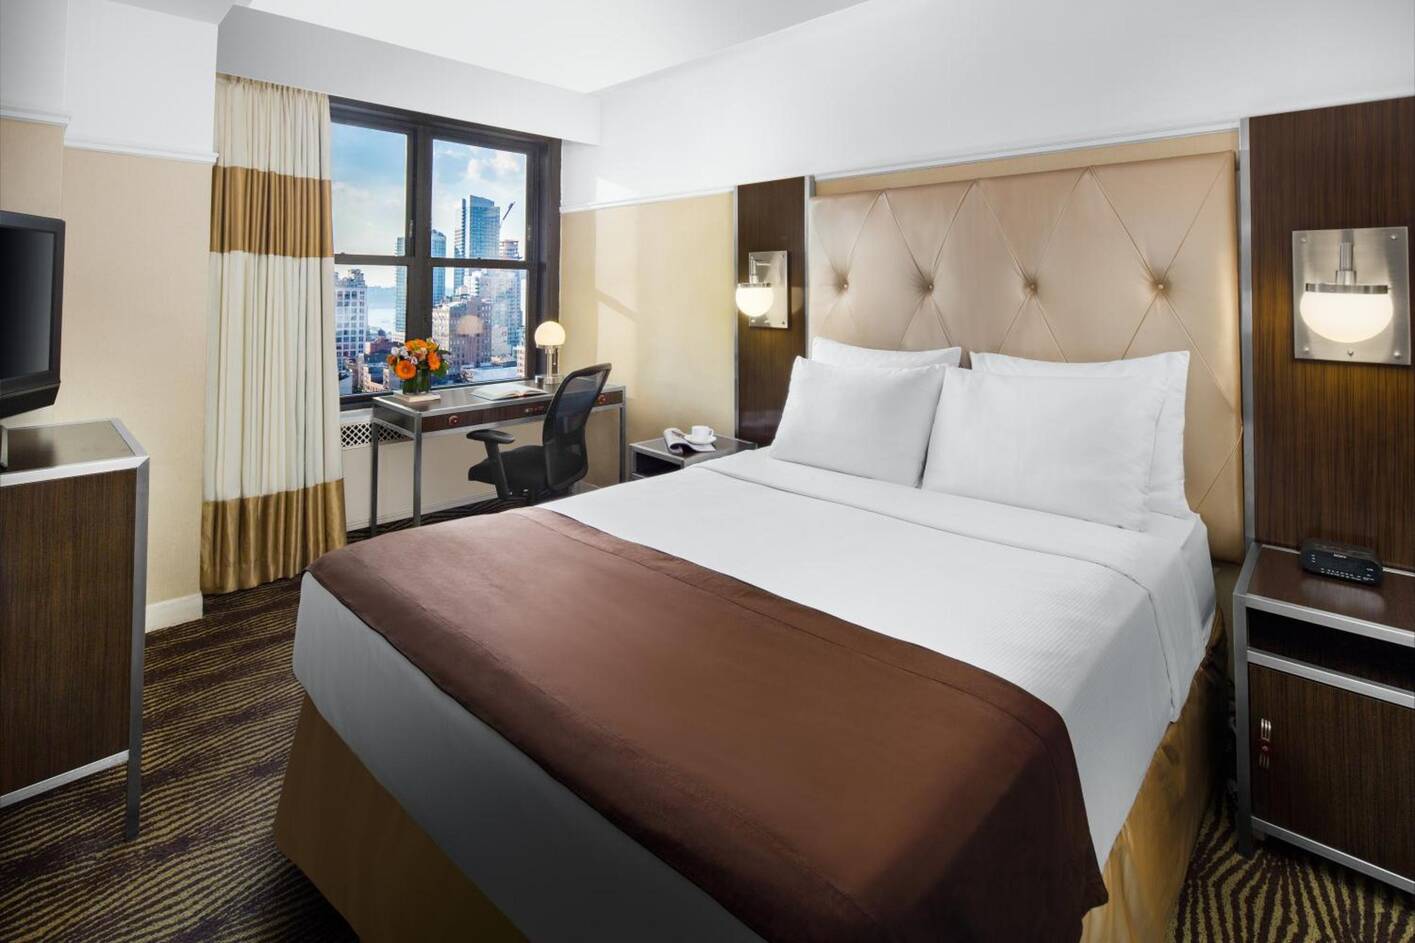 The New Yorker Hotel, affordable hotels in manhattan